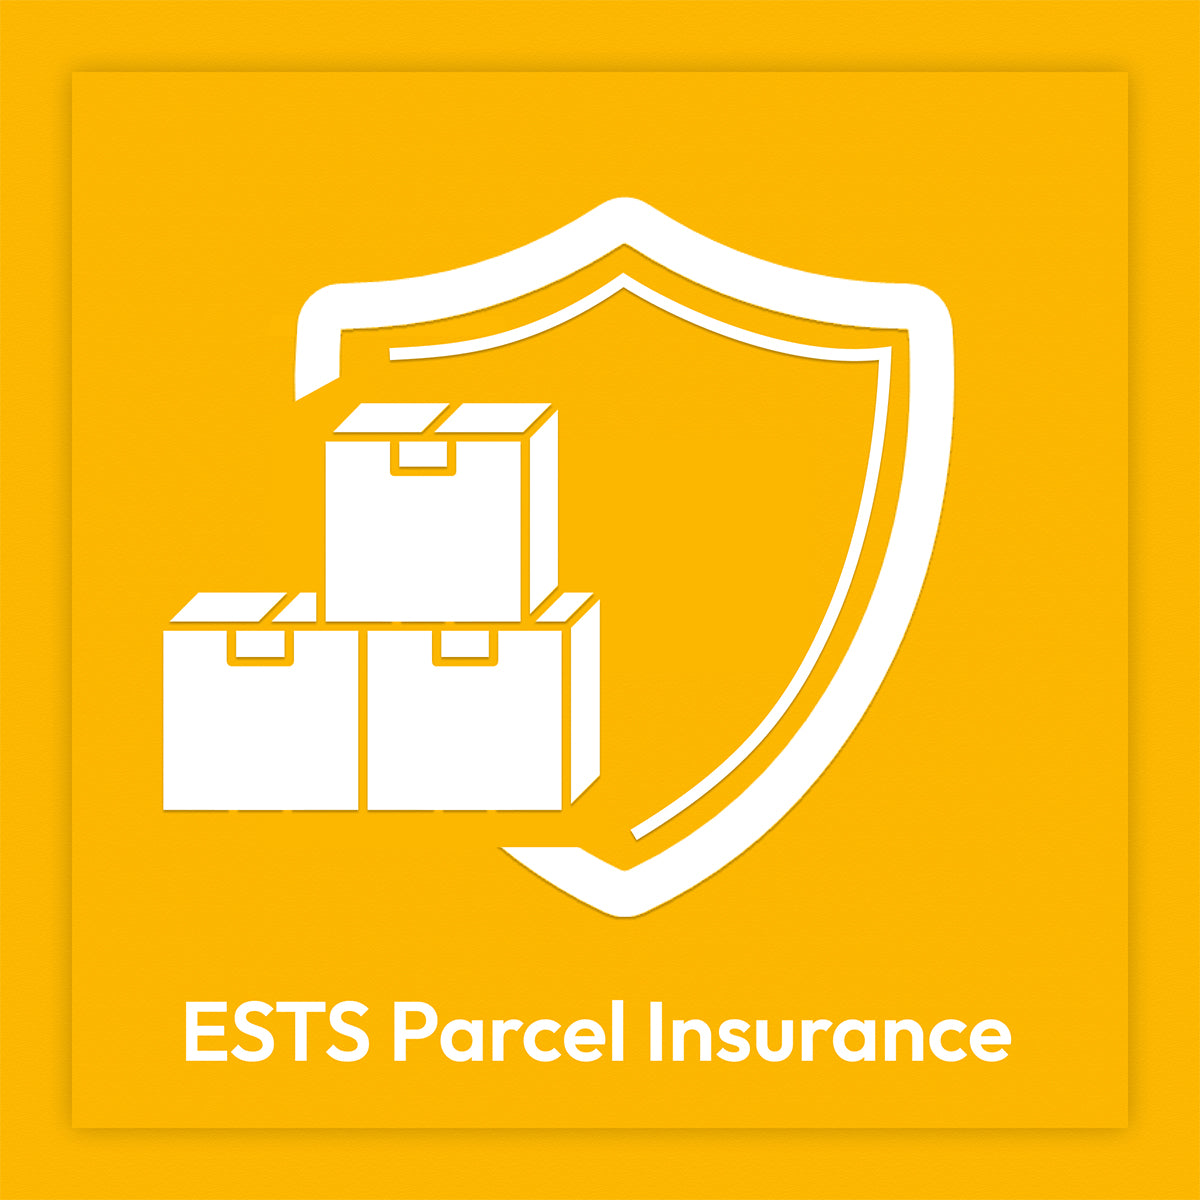 Hire Shopify Experts to integrate  ESTS Parcel Insurance app into a Shopify store